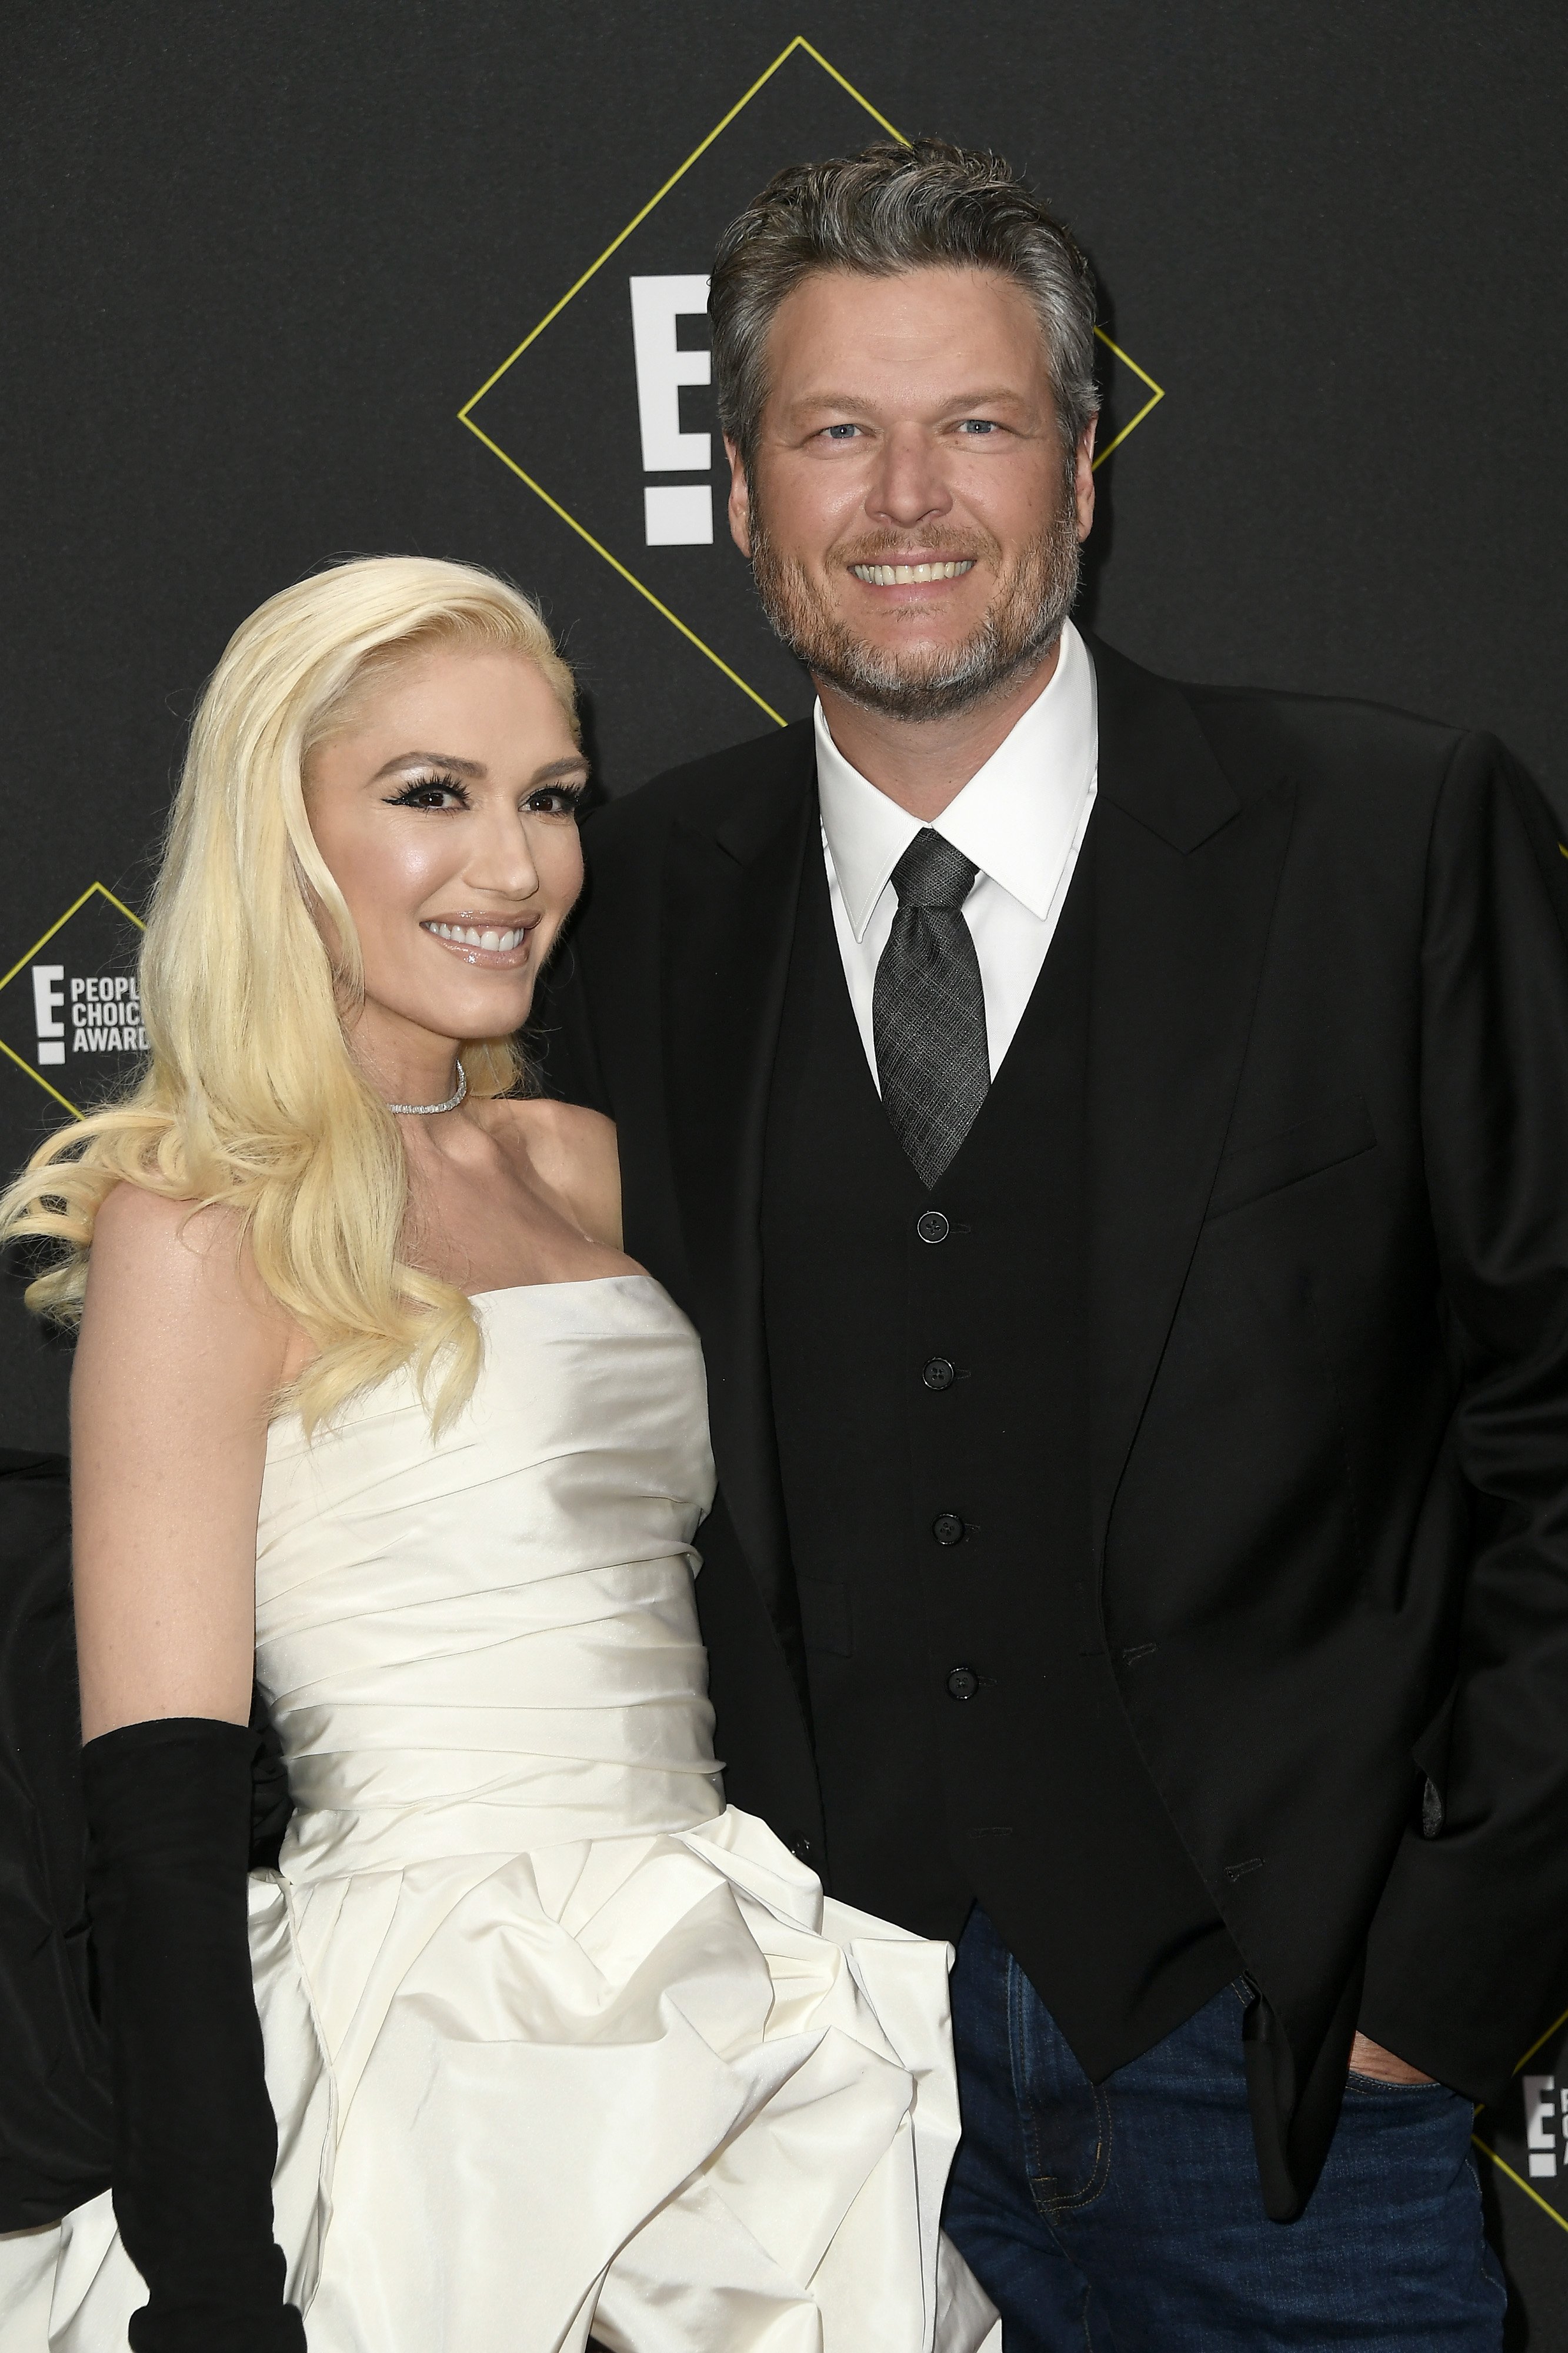 Gwen Stefani and Blake Shelton attend the People's Choice Awards in Santa Monica, California on November 10, 2019 | Photo: Getty Images